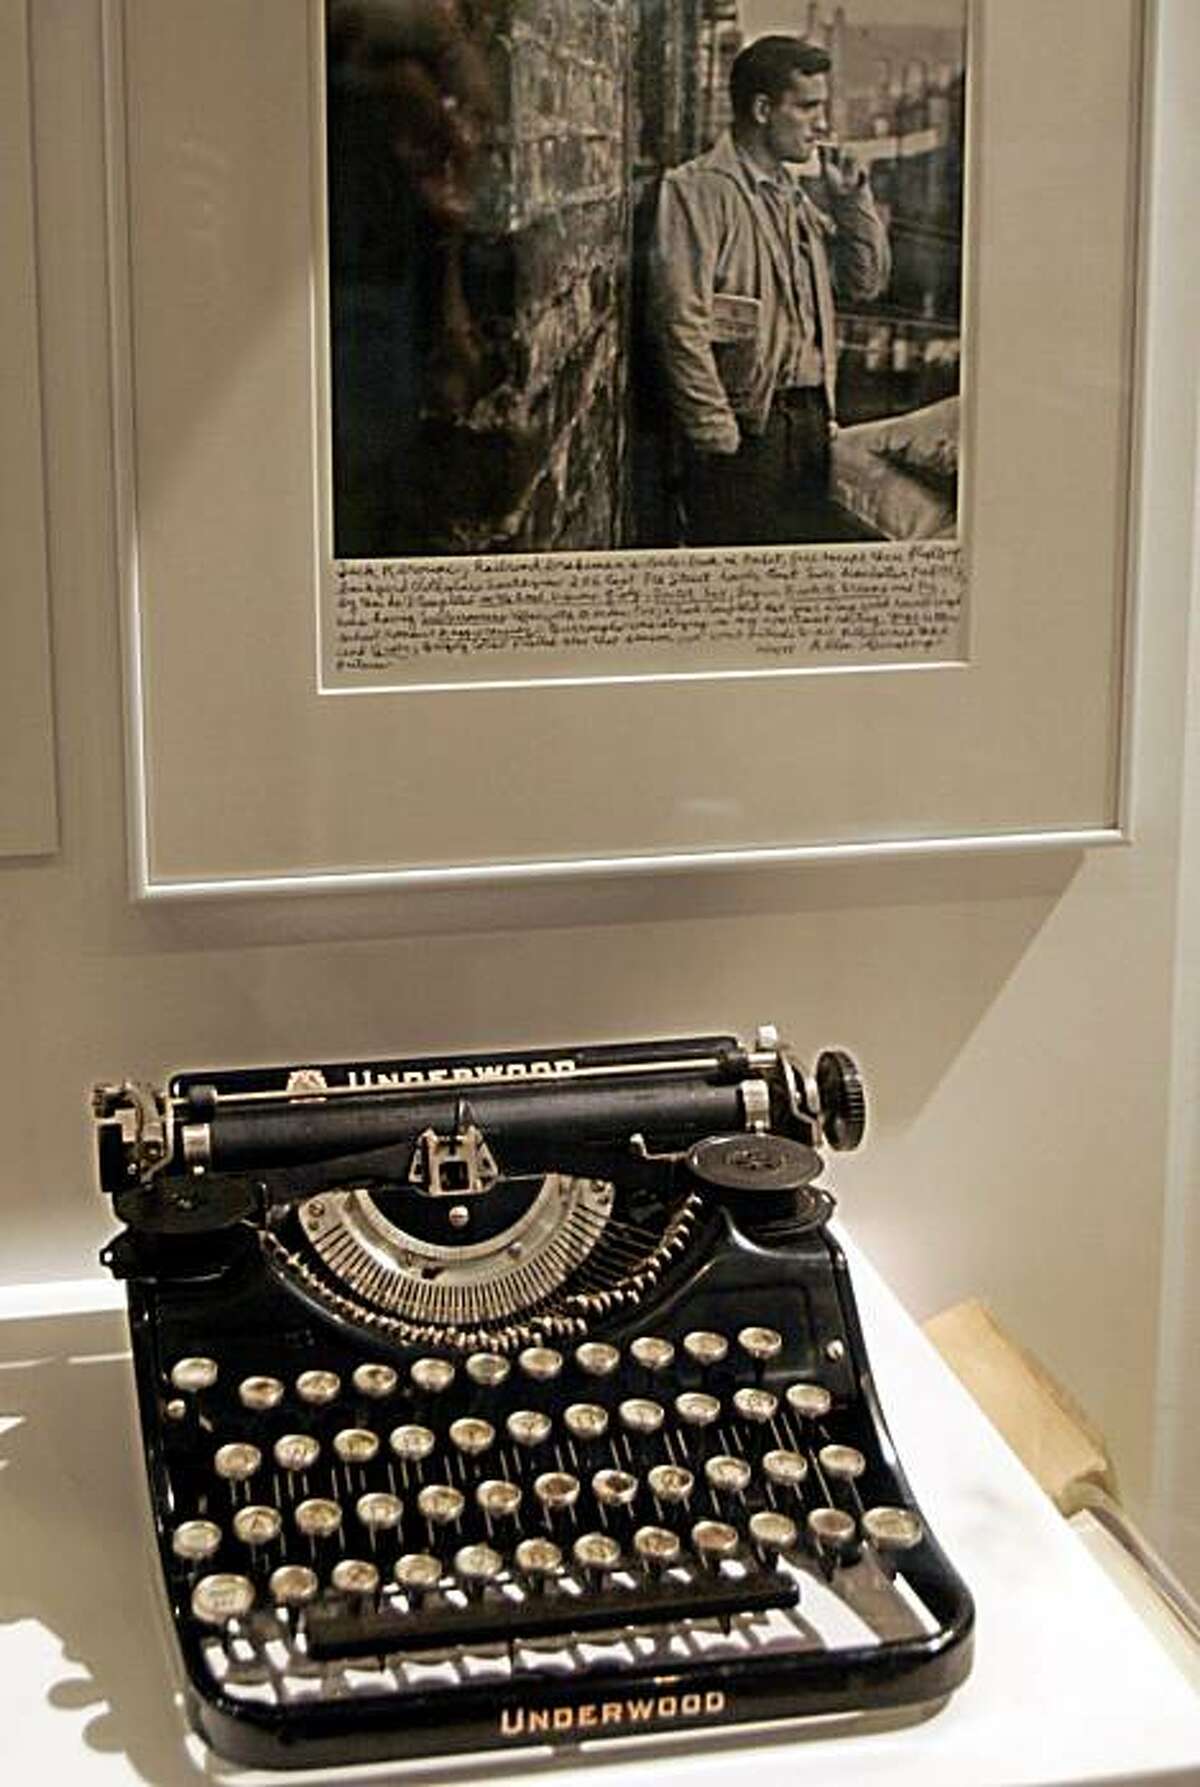 A display of writer Jack Kerouac artifacts including a typewriter are seen in Working People Exhibit at Morgan Cultural Center, in the Lowell National Historic Park in Lowell, Mass., Monday, May 1, 2006. The story of Kerouac, whose parents emigrated from French Canada before his birth in Lowell in 1922, is inseparable from the mills and the stream of immigrants coming to the banks of the Merrimack River since the early 1800s.